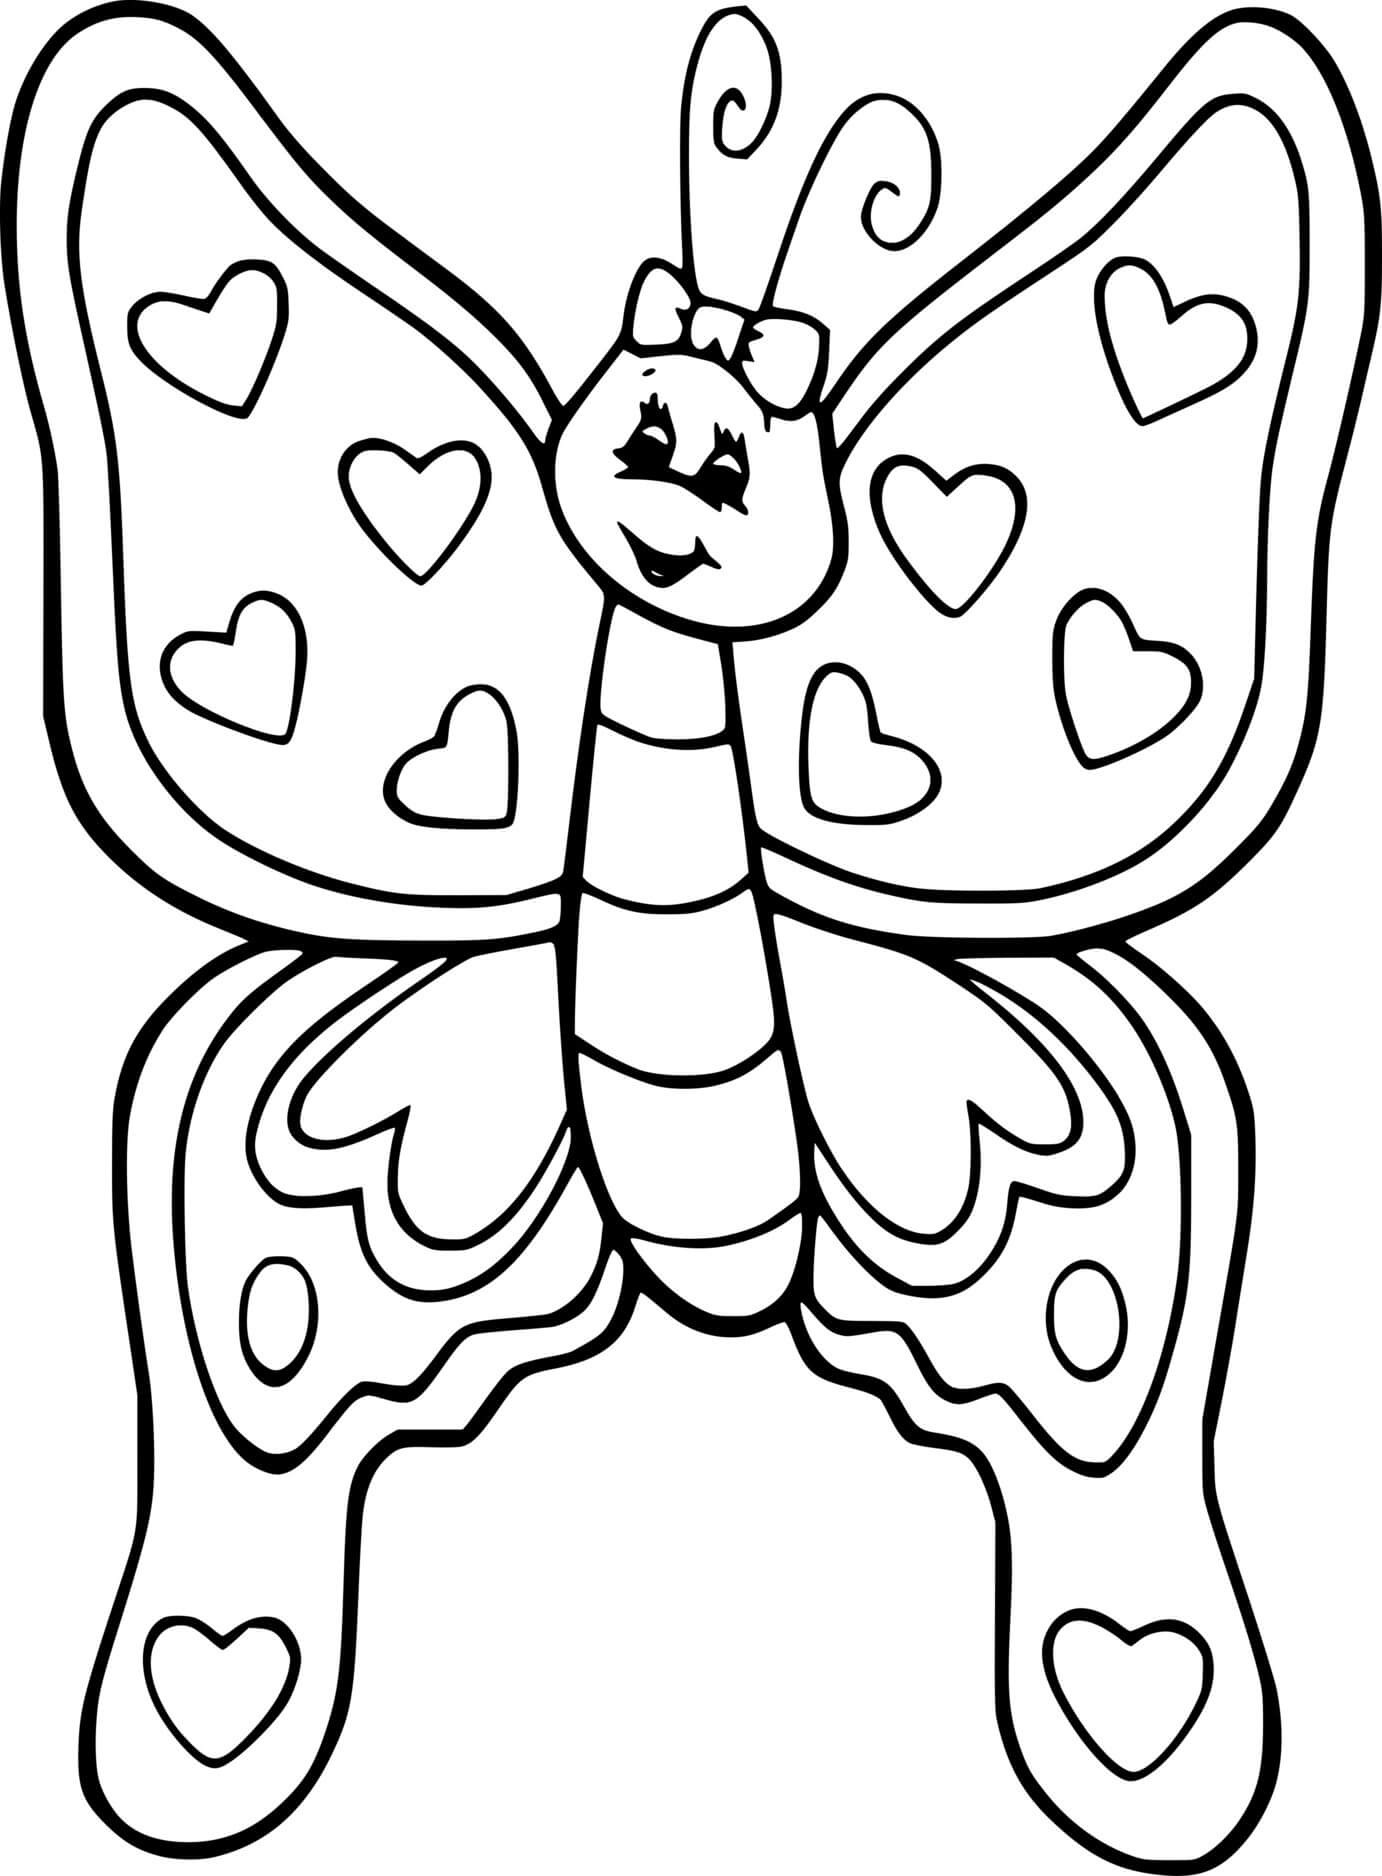 Butterfly with a Bowknot